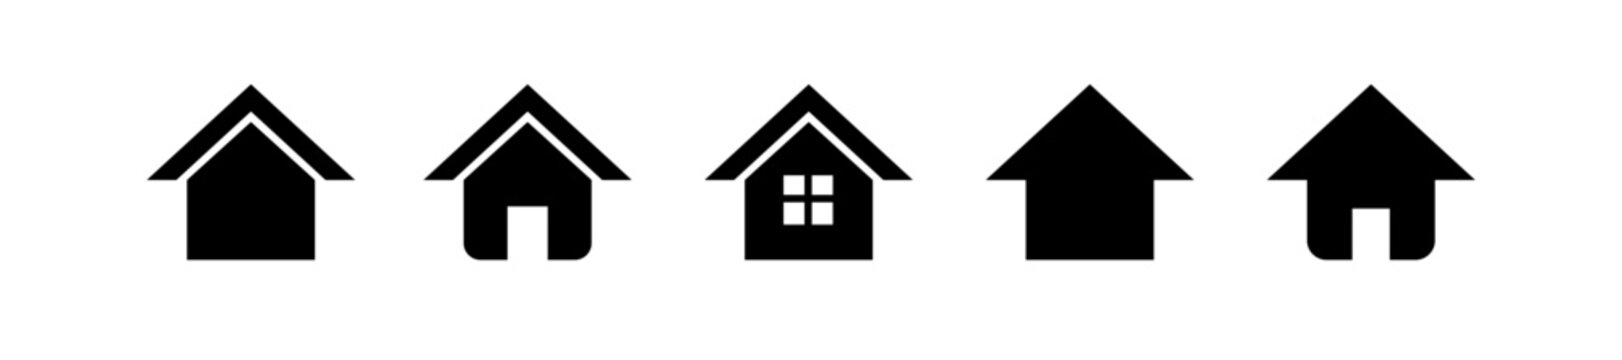 house icon. house, home, property, real estate or residential in flat style - stock vector	